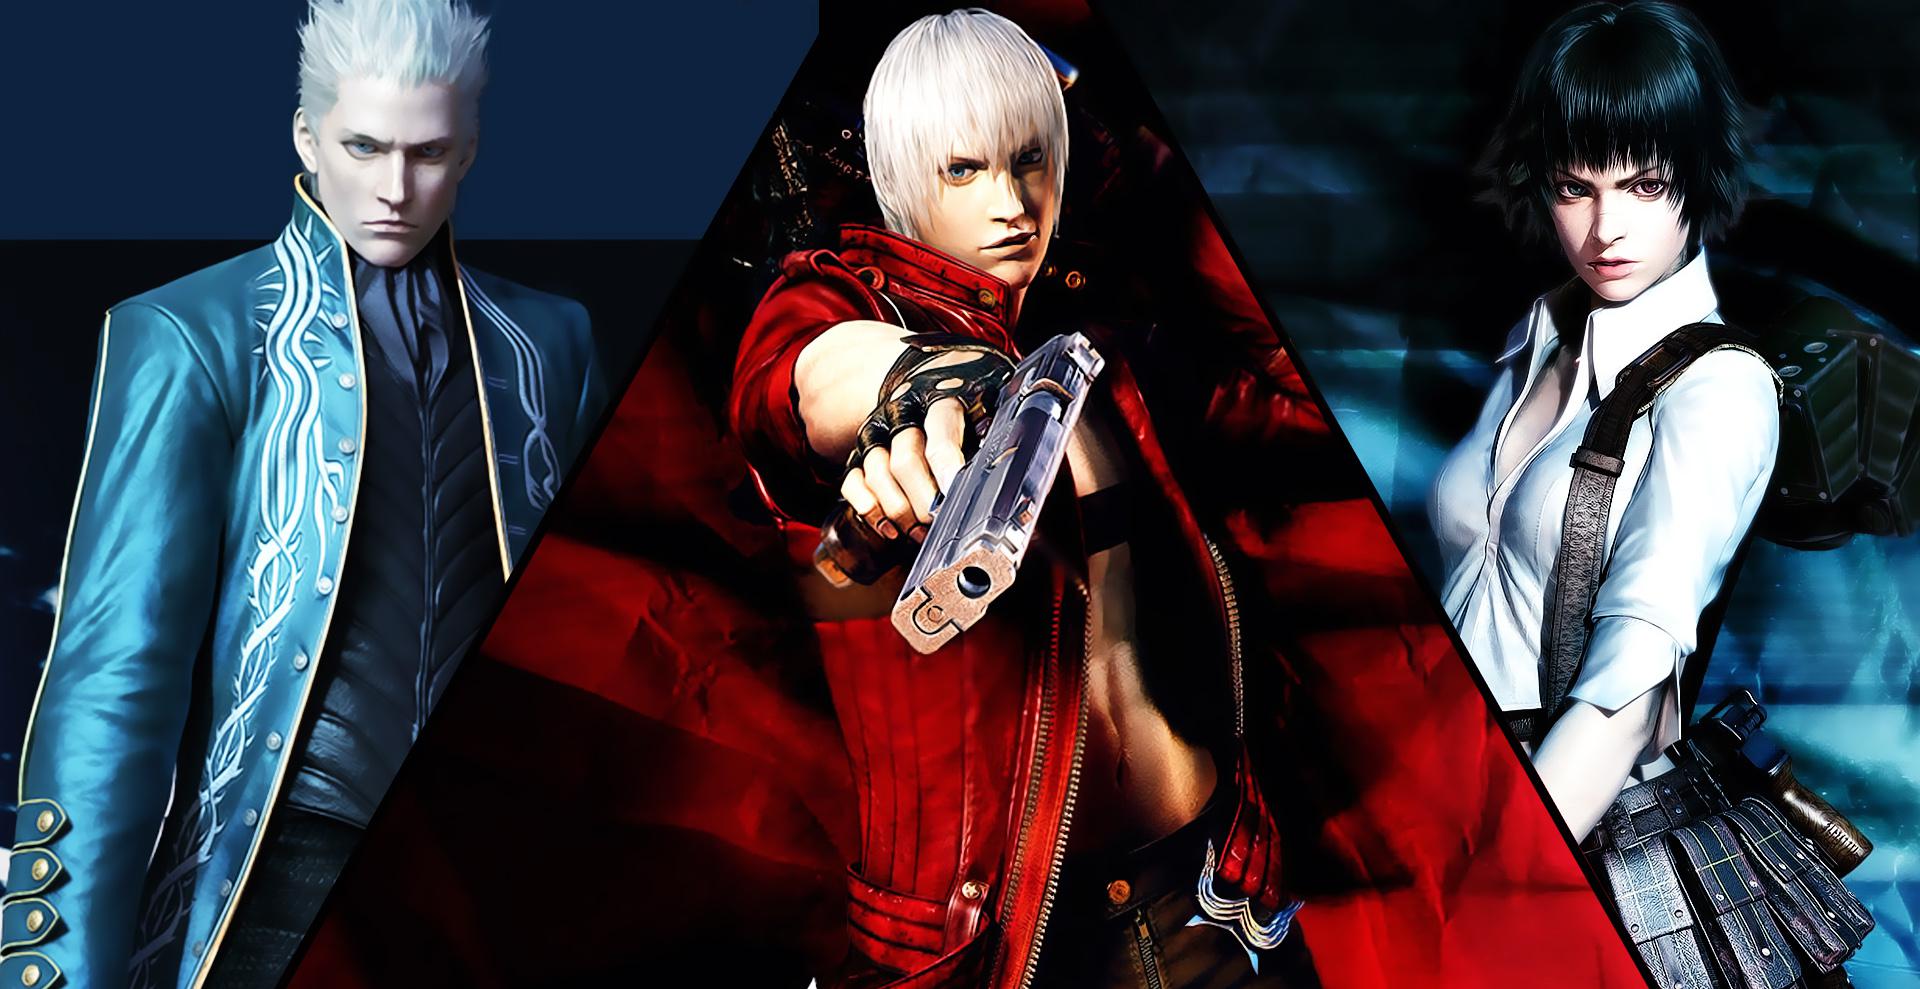 Devil may cry 3 ost tpb torrent ad hoc wireless networks architectures and protocols ebook torrents